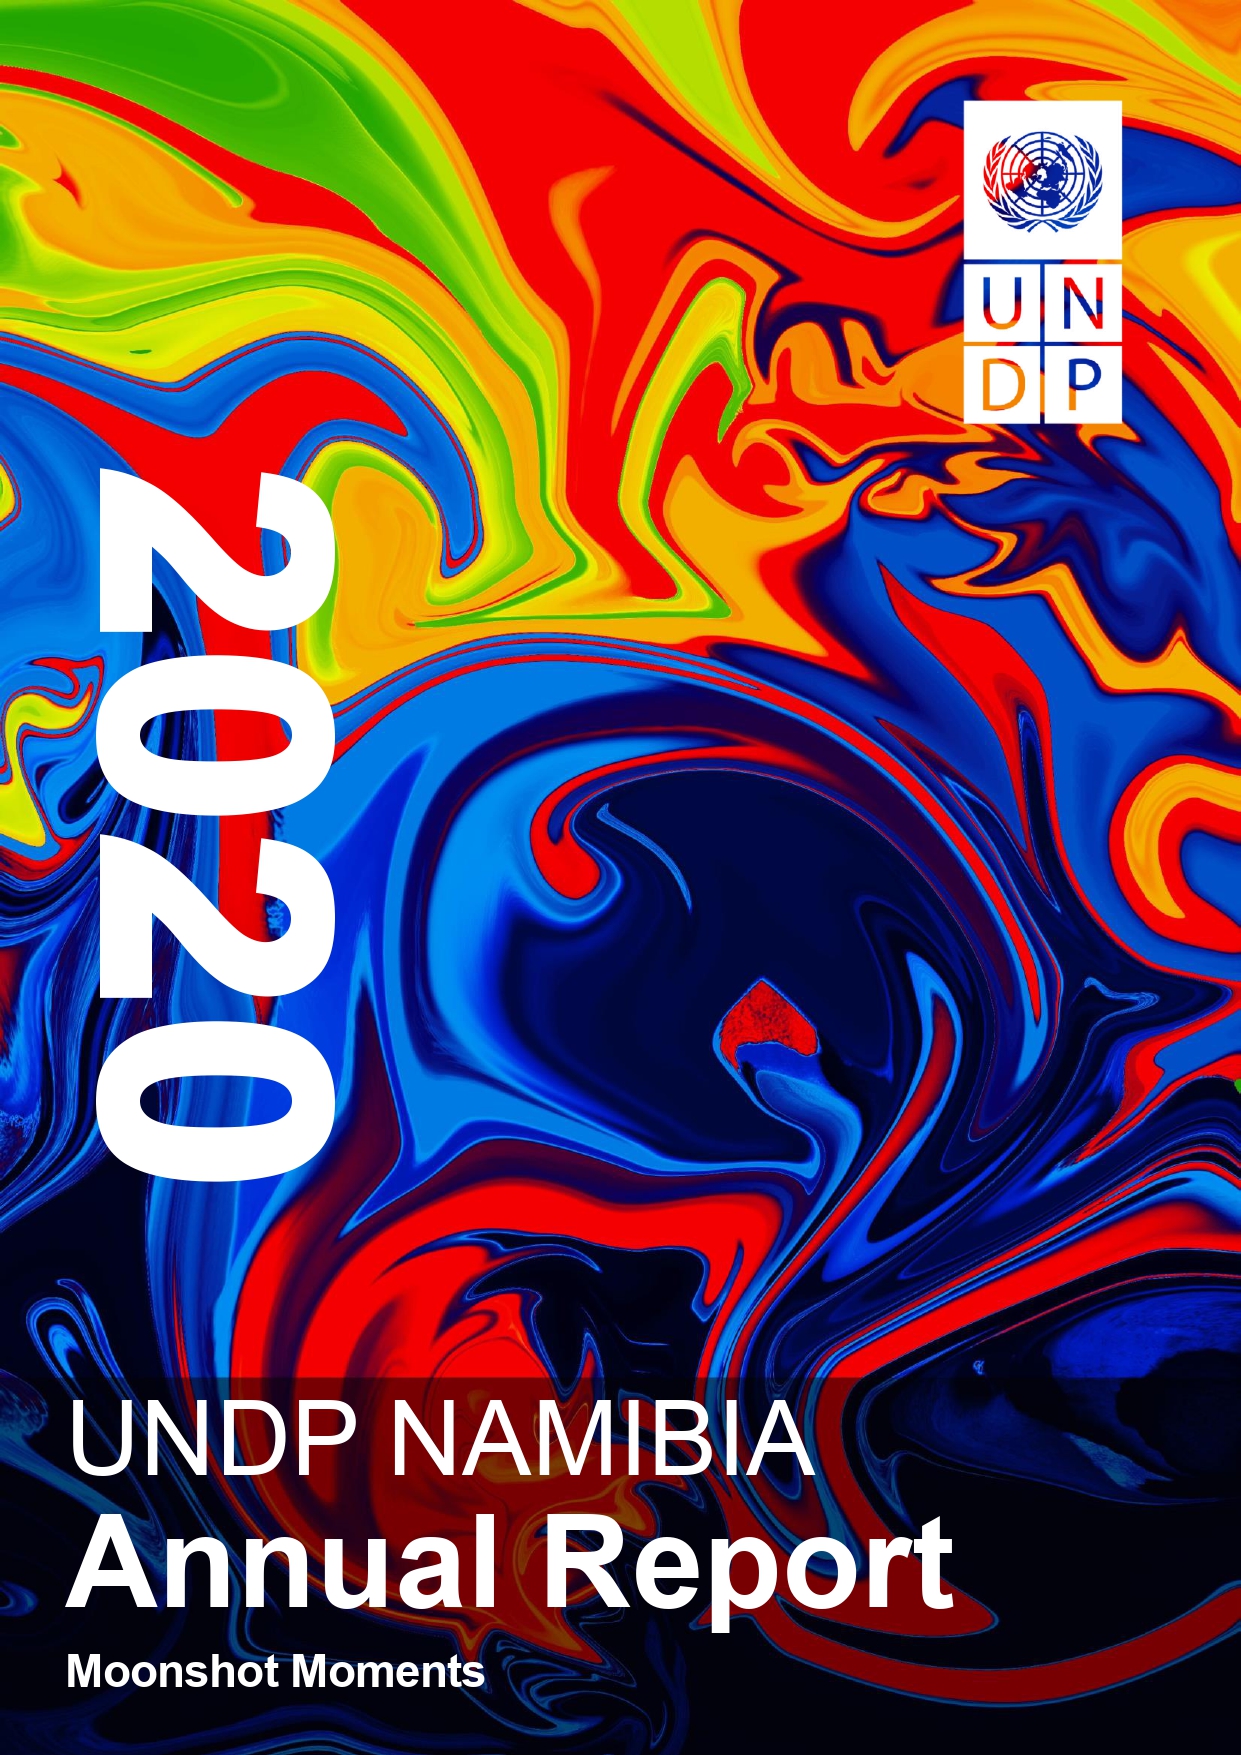 UNDP Namibia 2020 Annual Report